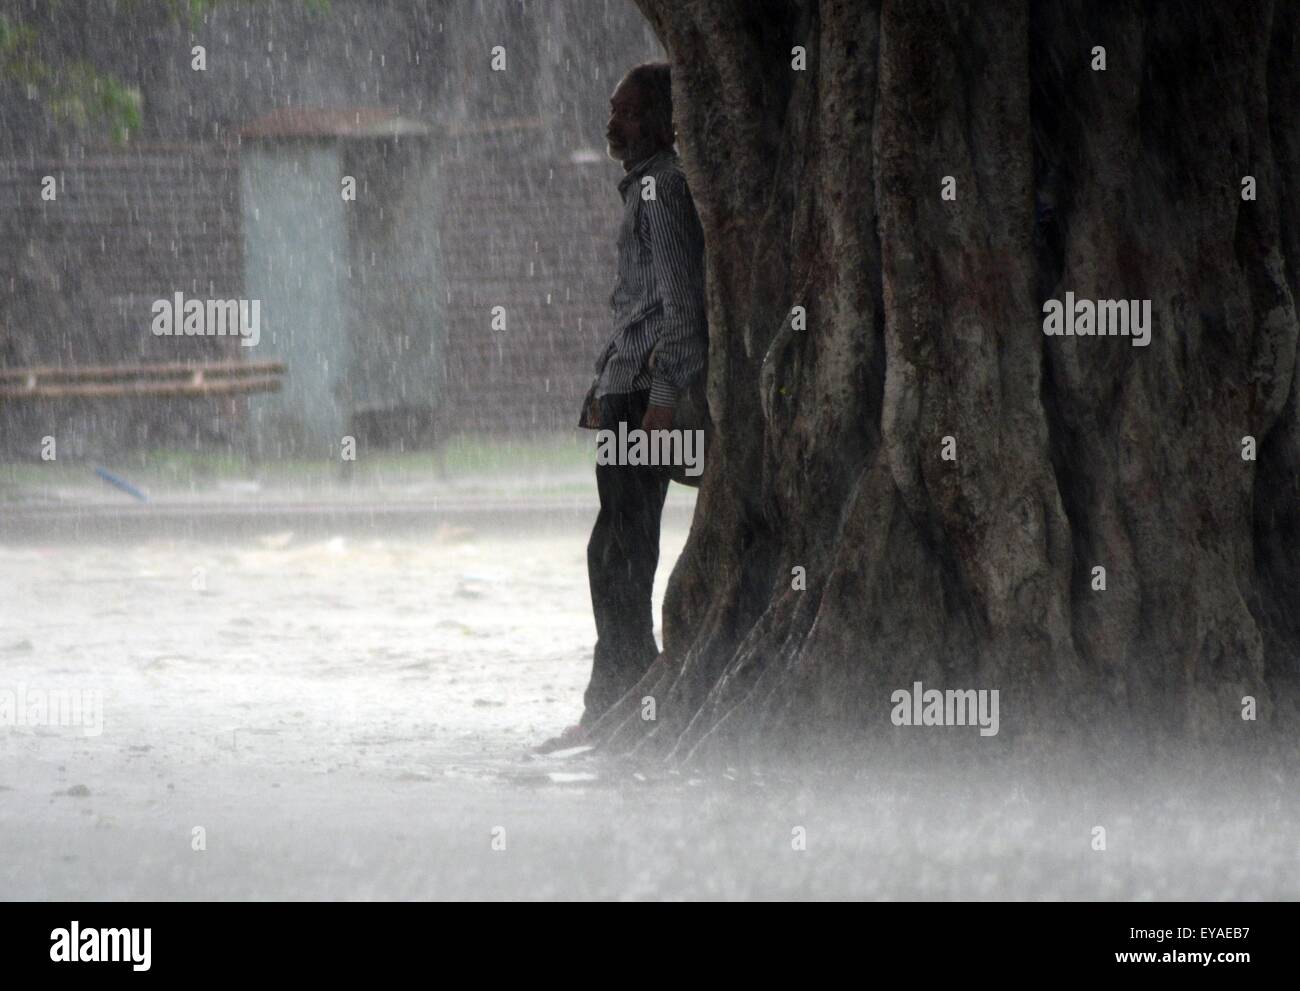 Allahabad, Uttar Pradesh, India. 25th July, 2015. Allahabad: A devotee stand under a tree for being safe from rain in Allahabad on 25-07-2015. photo by prabhat kumar verma (Credit Image: © via ZUMA Wire) Credit:  ZUMA Press, Inc./Alamy Live News Stock Photo